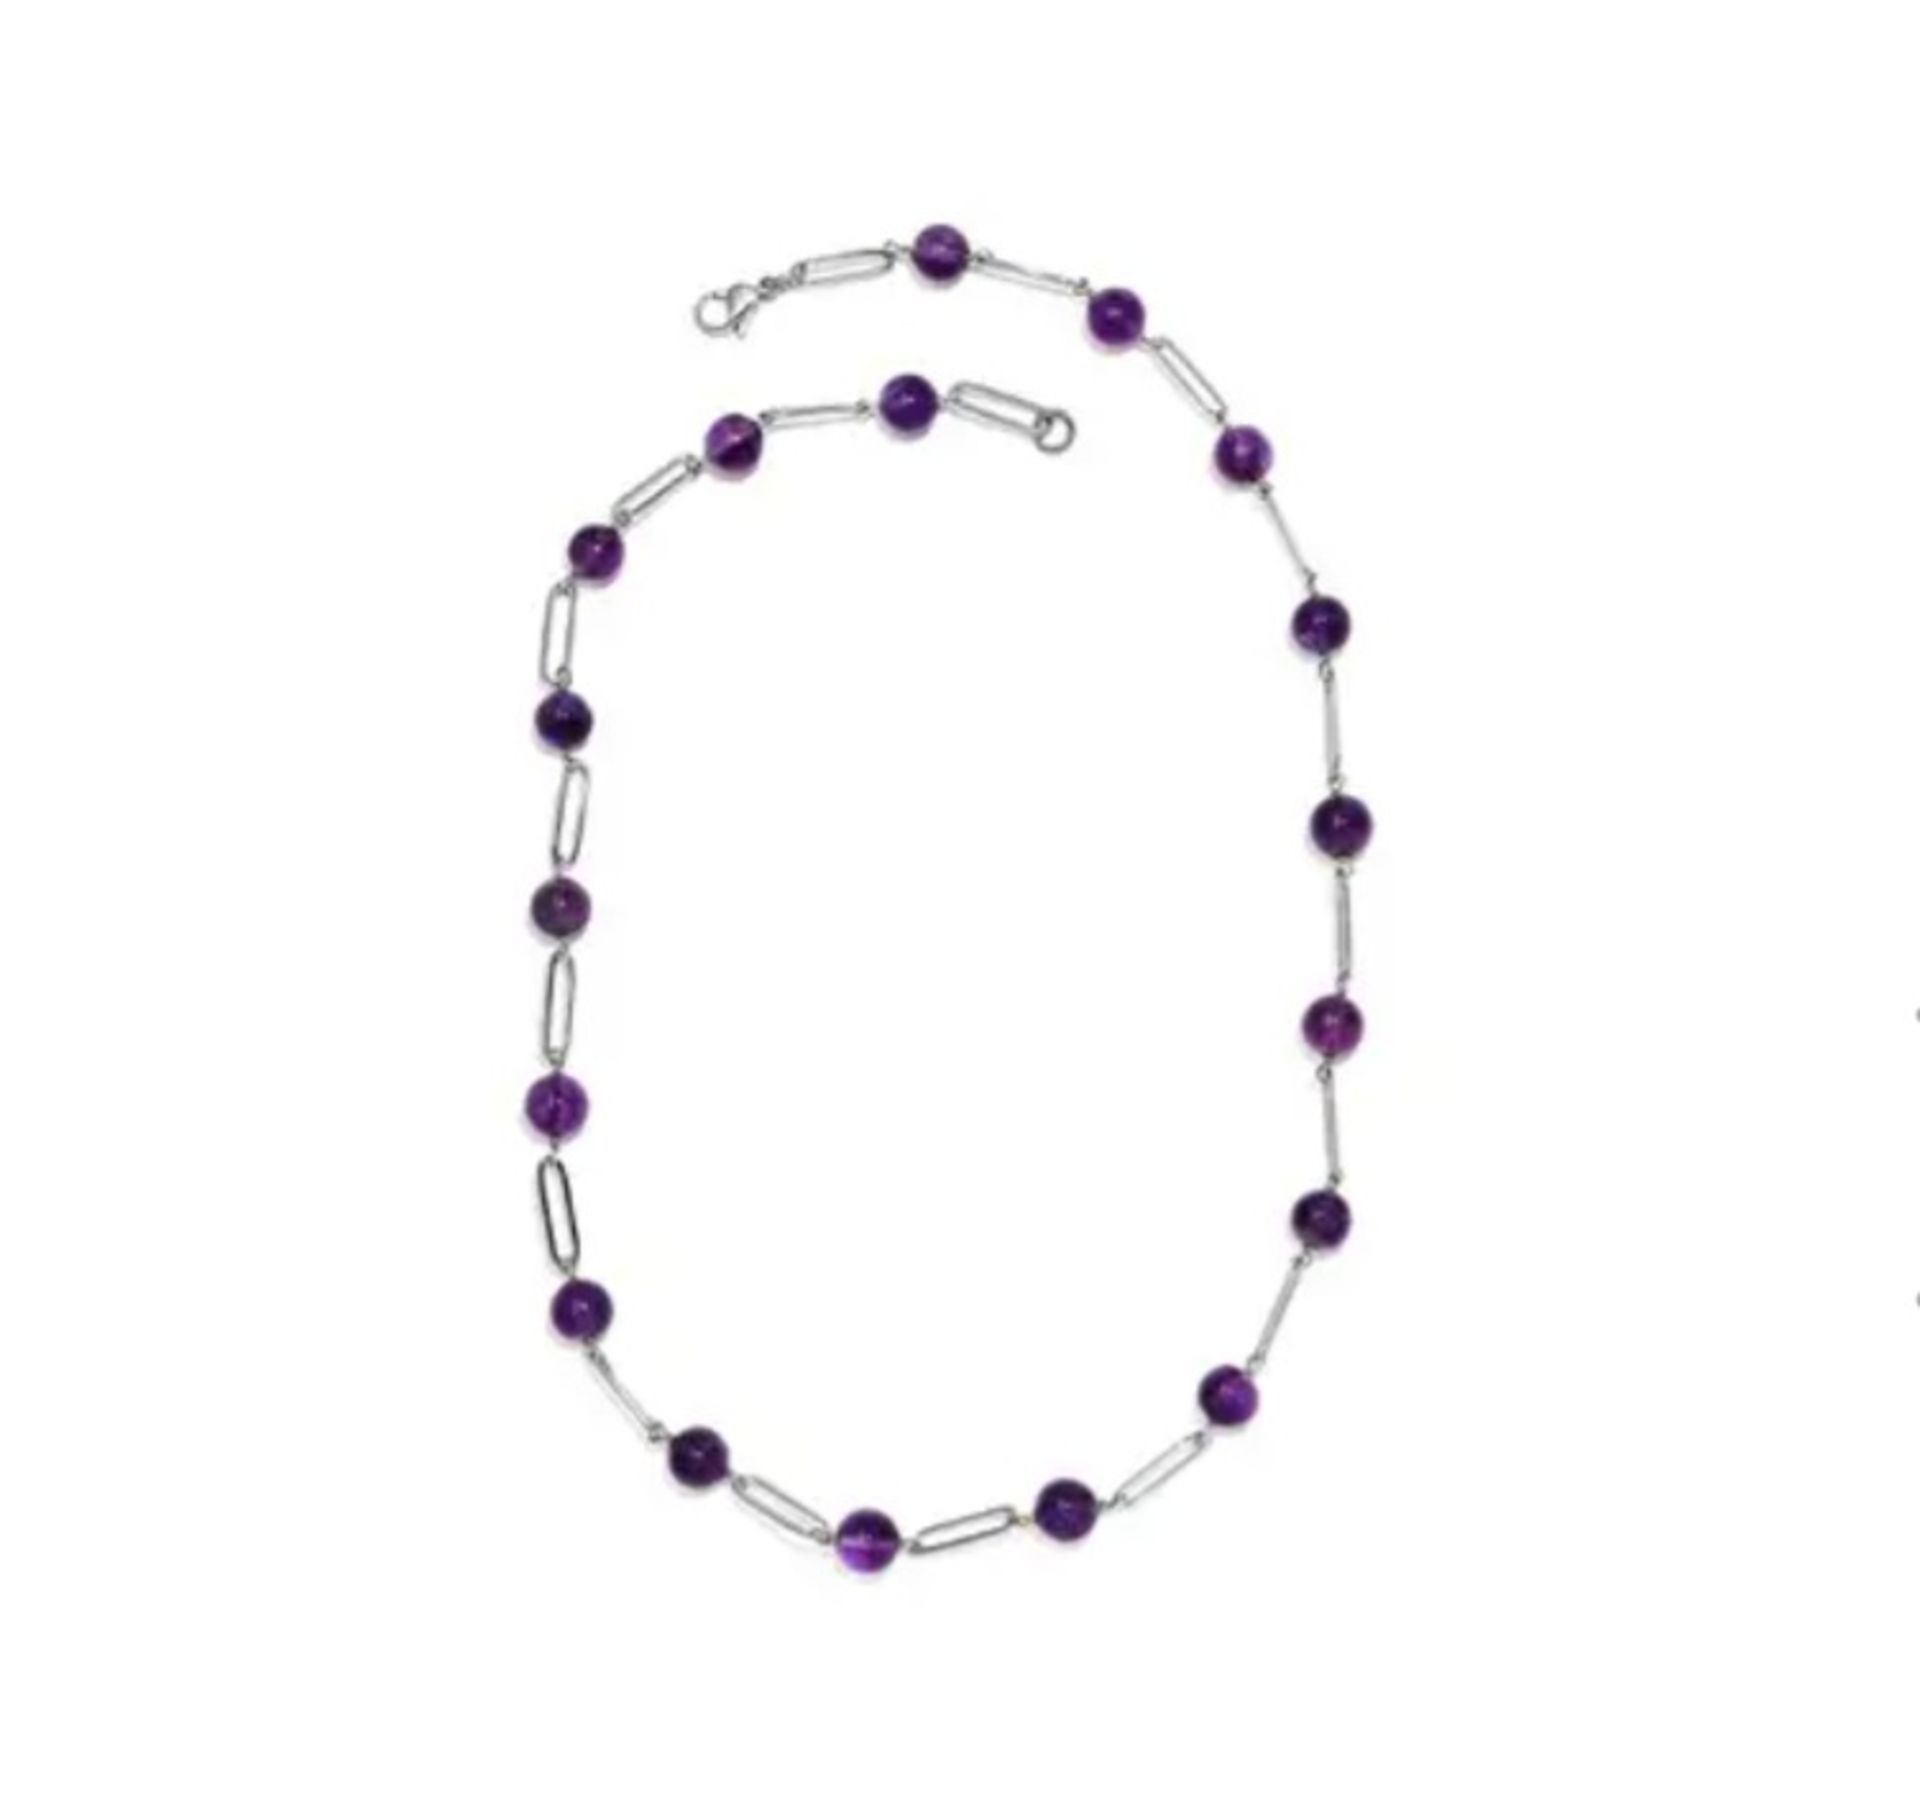 New! Amethyst Necklace in Stainless Steel - Image 2 of 4